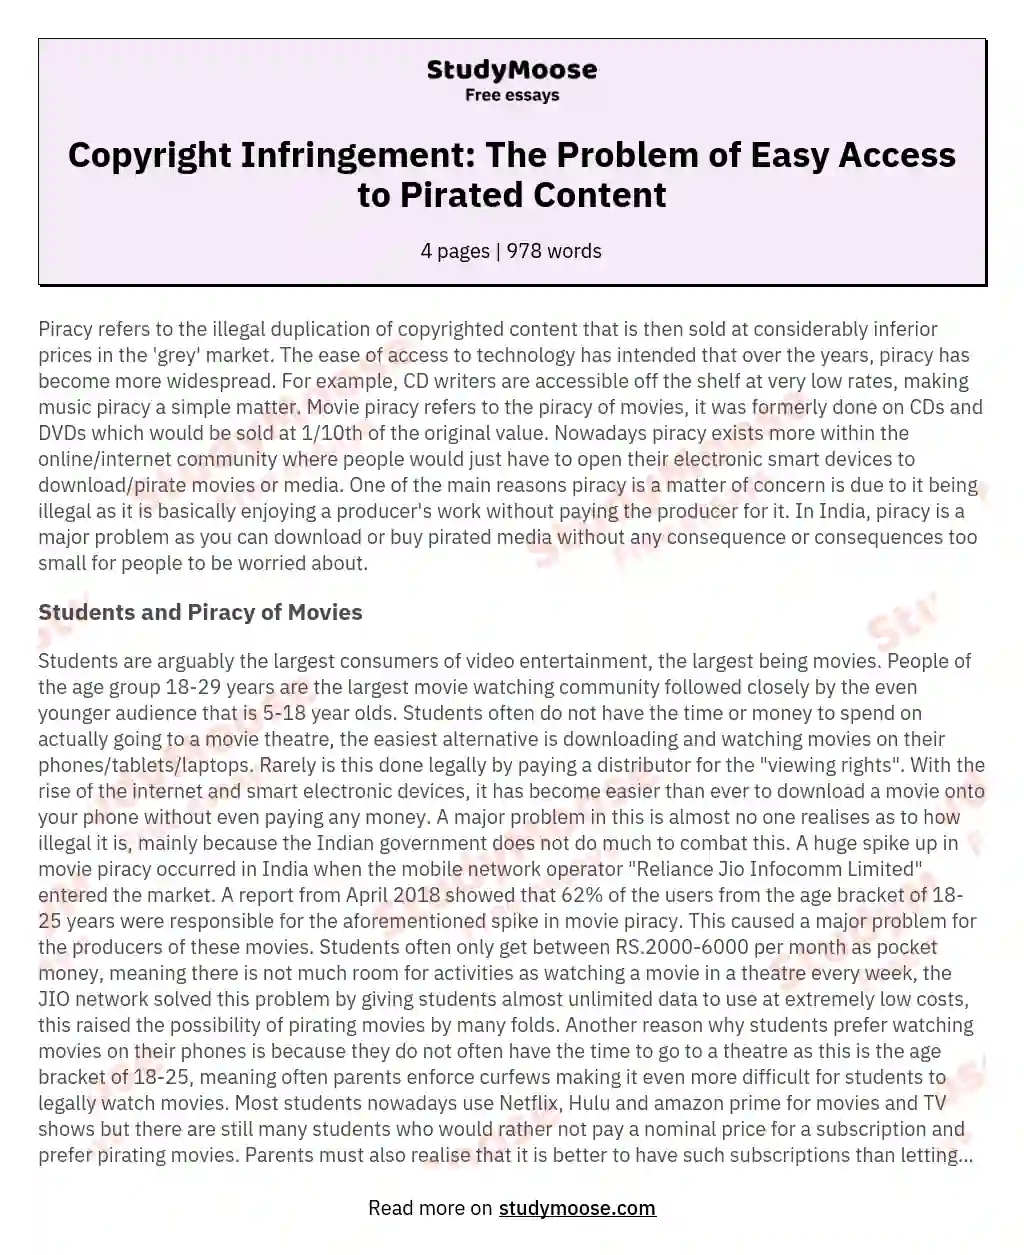 Copyright Infringement: The Problem of Easy Access to Pirated Content essay